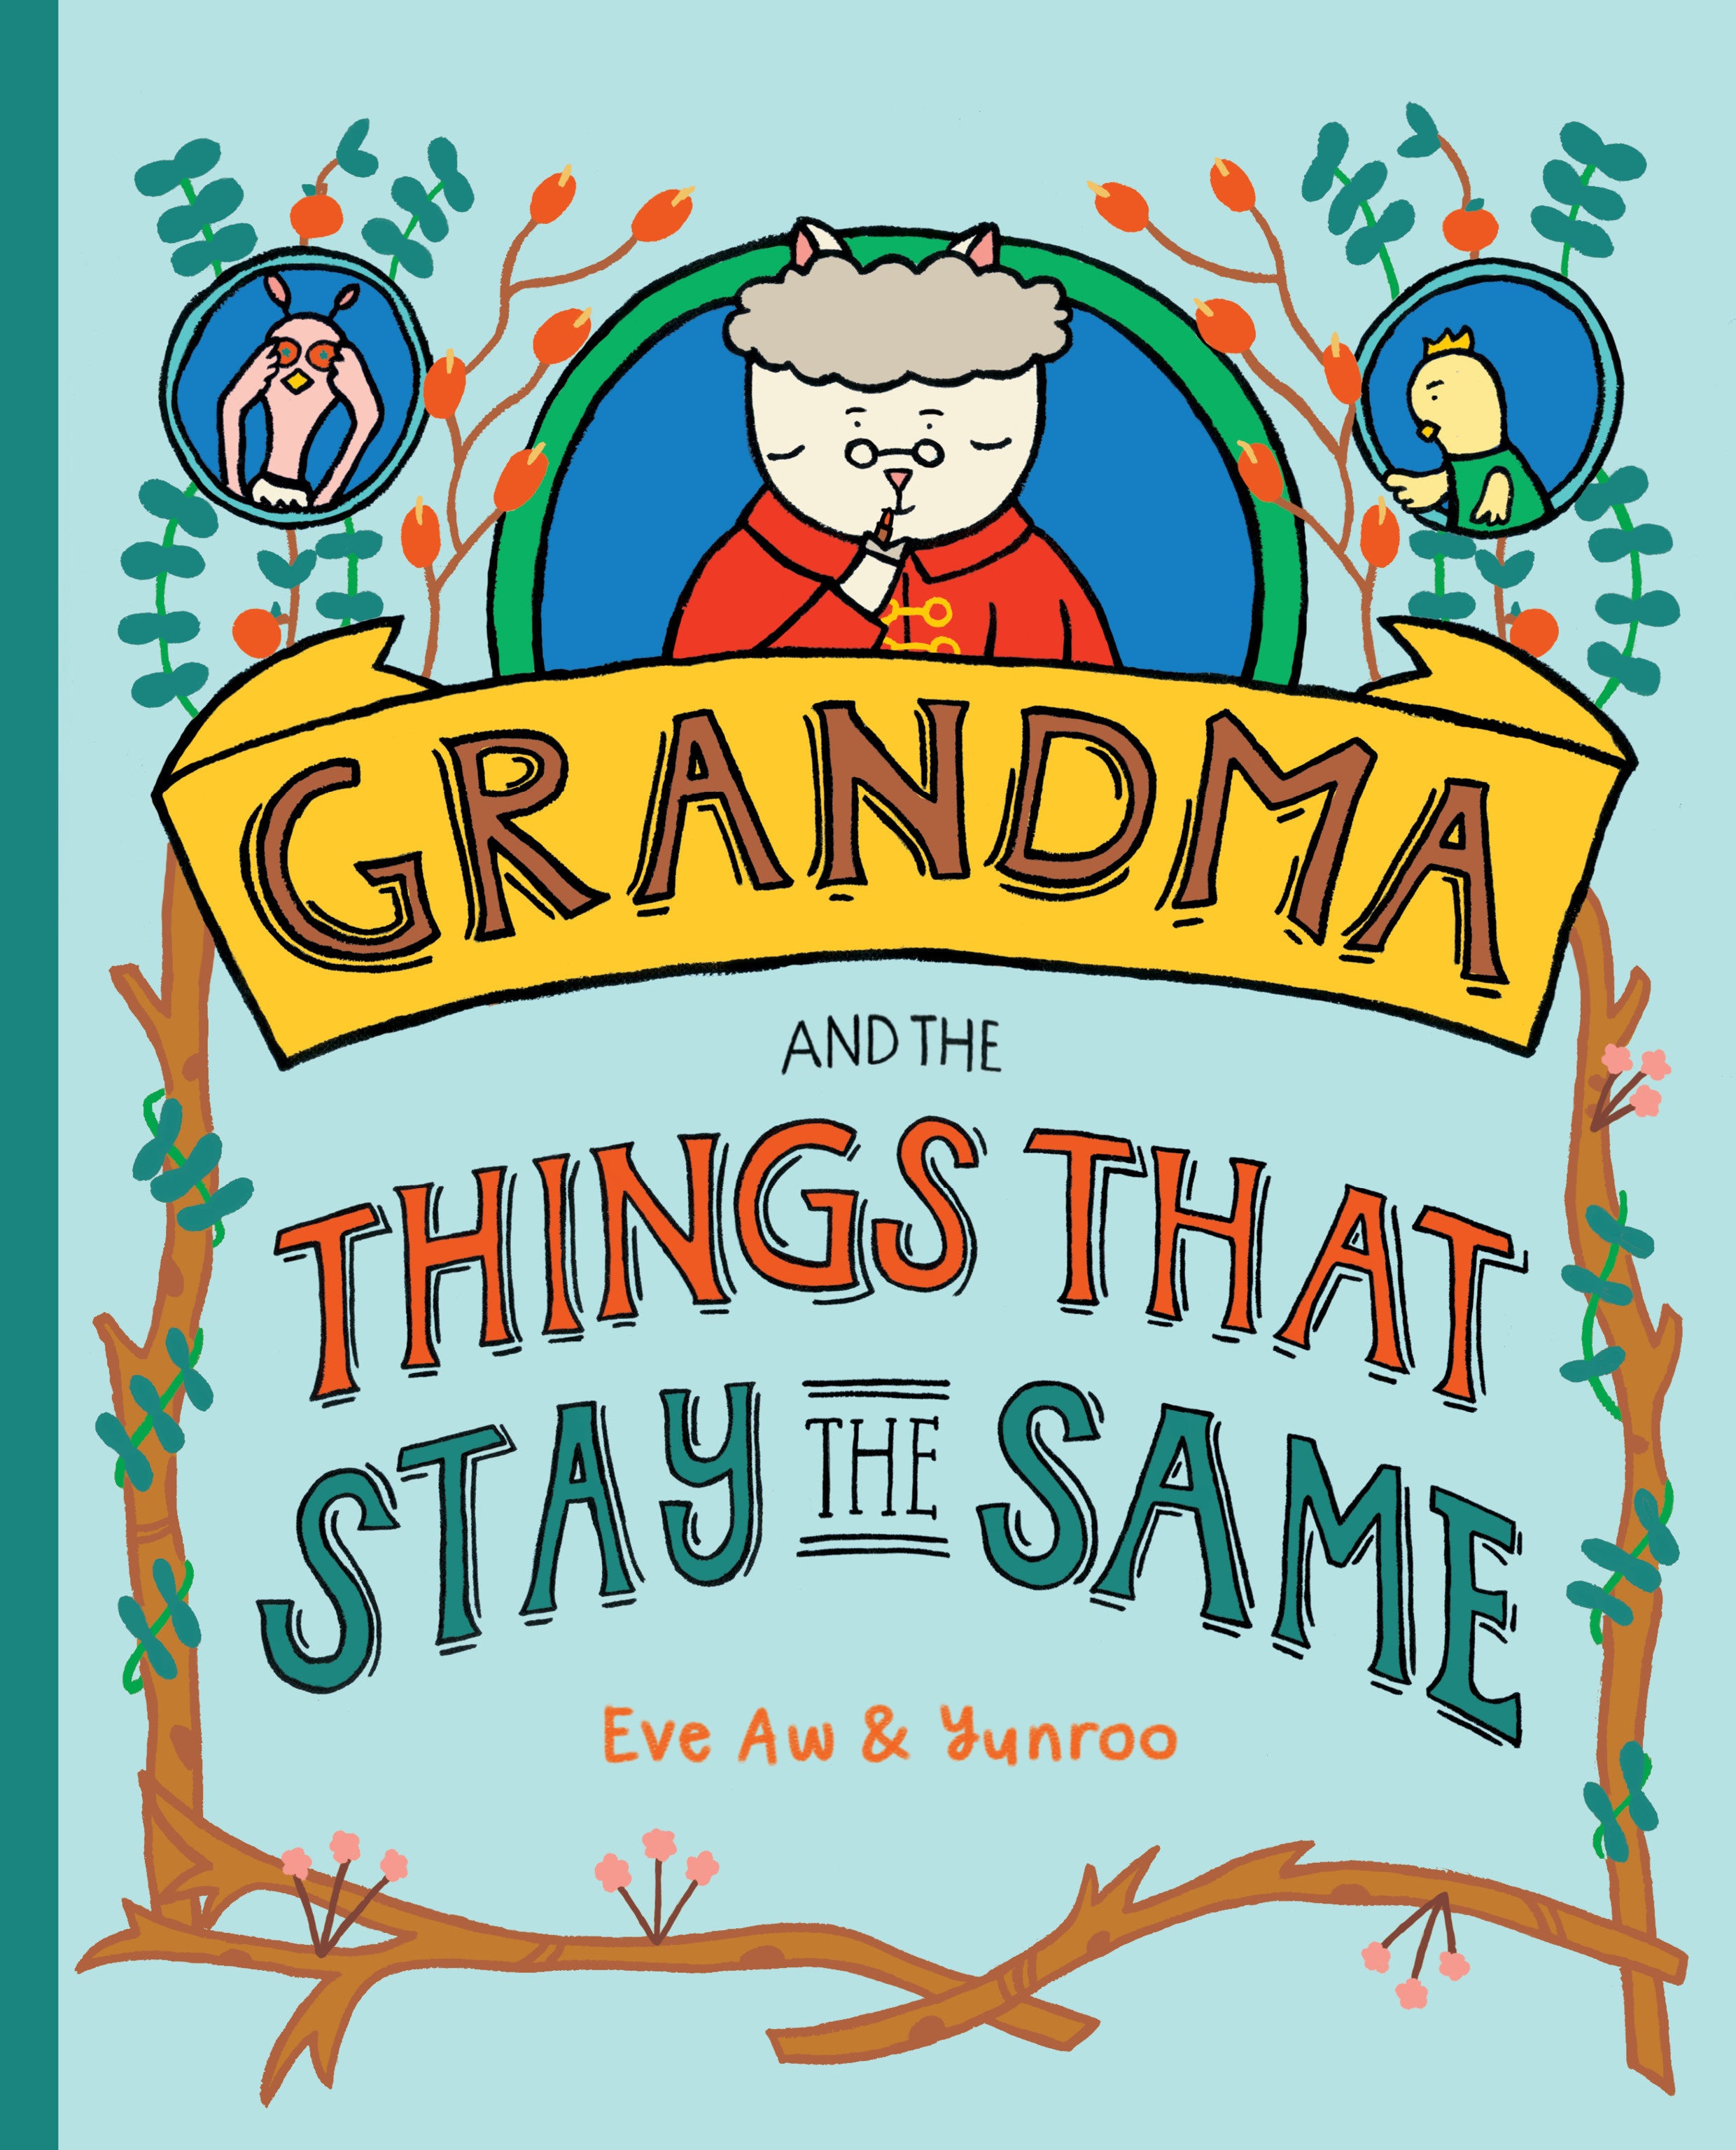 Grandma and the Things That Stay the Same